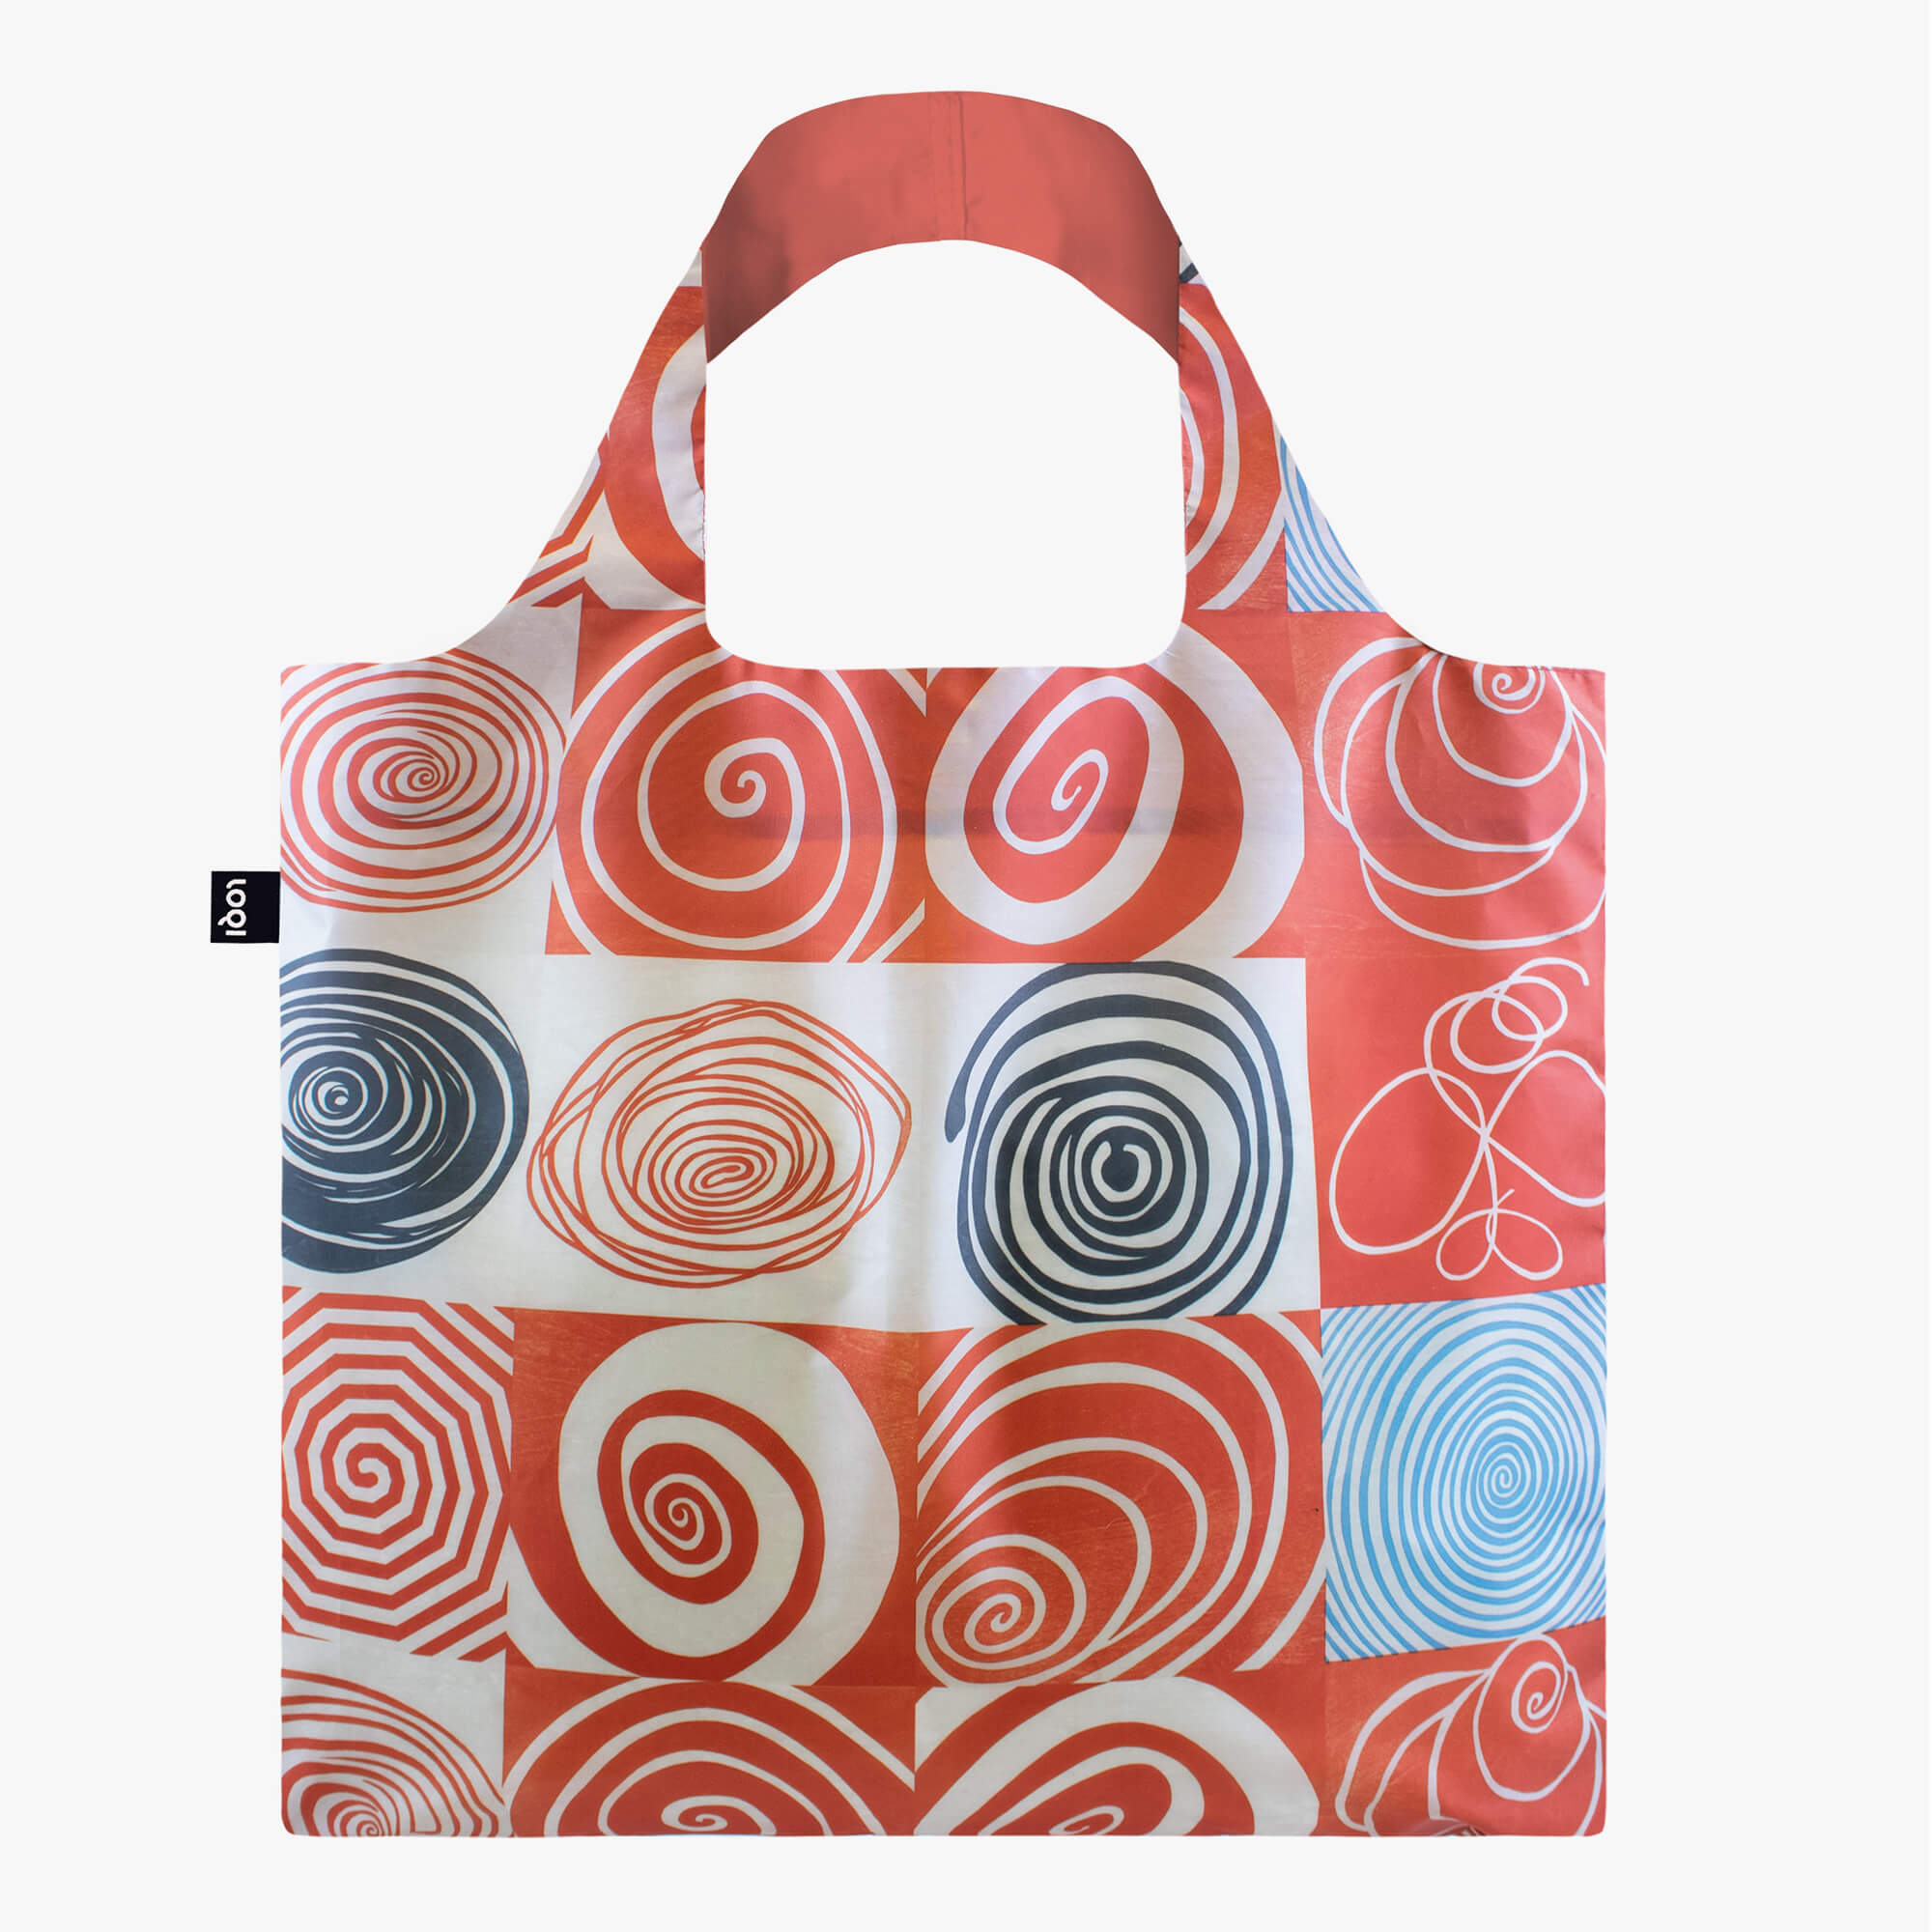 Van Gogh Sunflowers Tote Bag — Travel & Tech for Artists